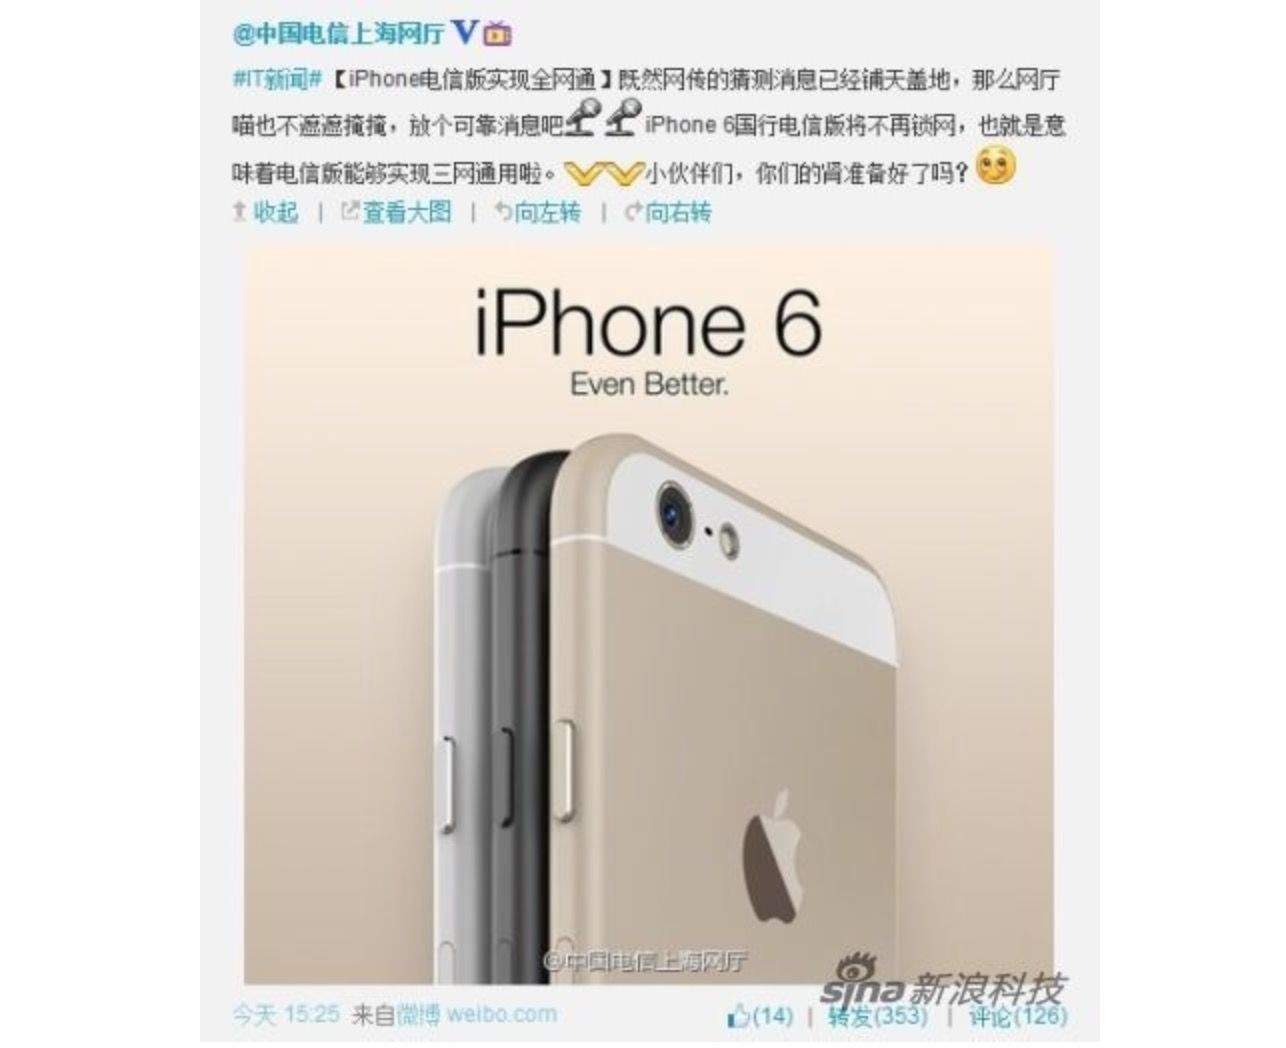 China Telecom, a competitor to China Mobile, has also teased the iPhone 6 ahead of its unveiling.